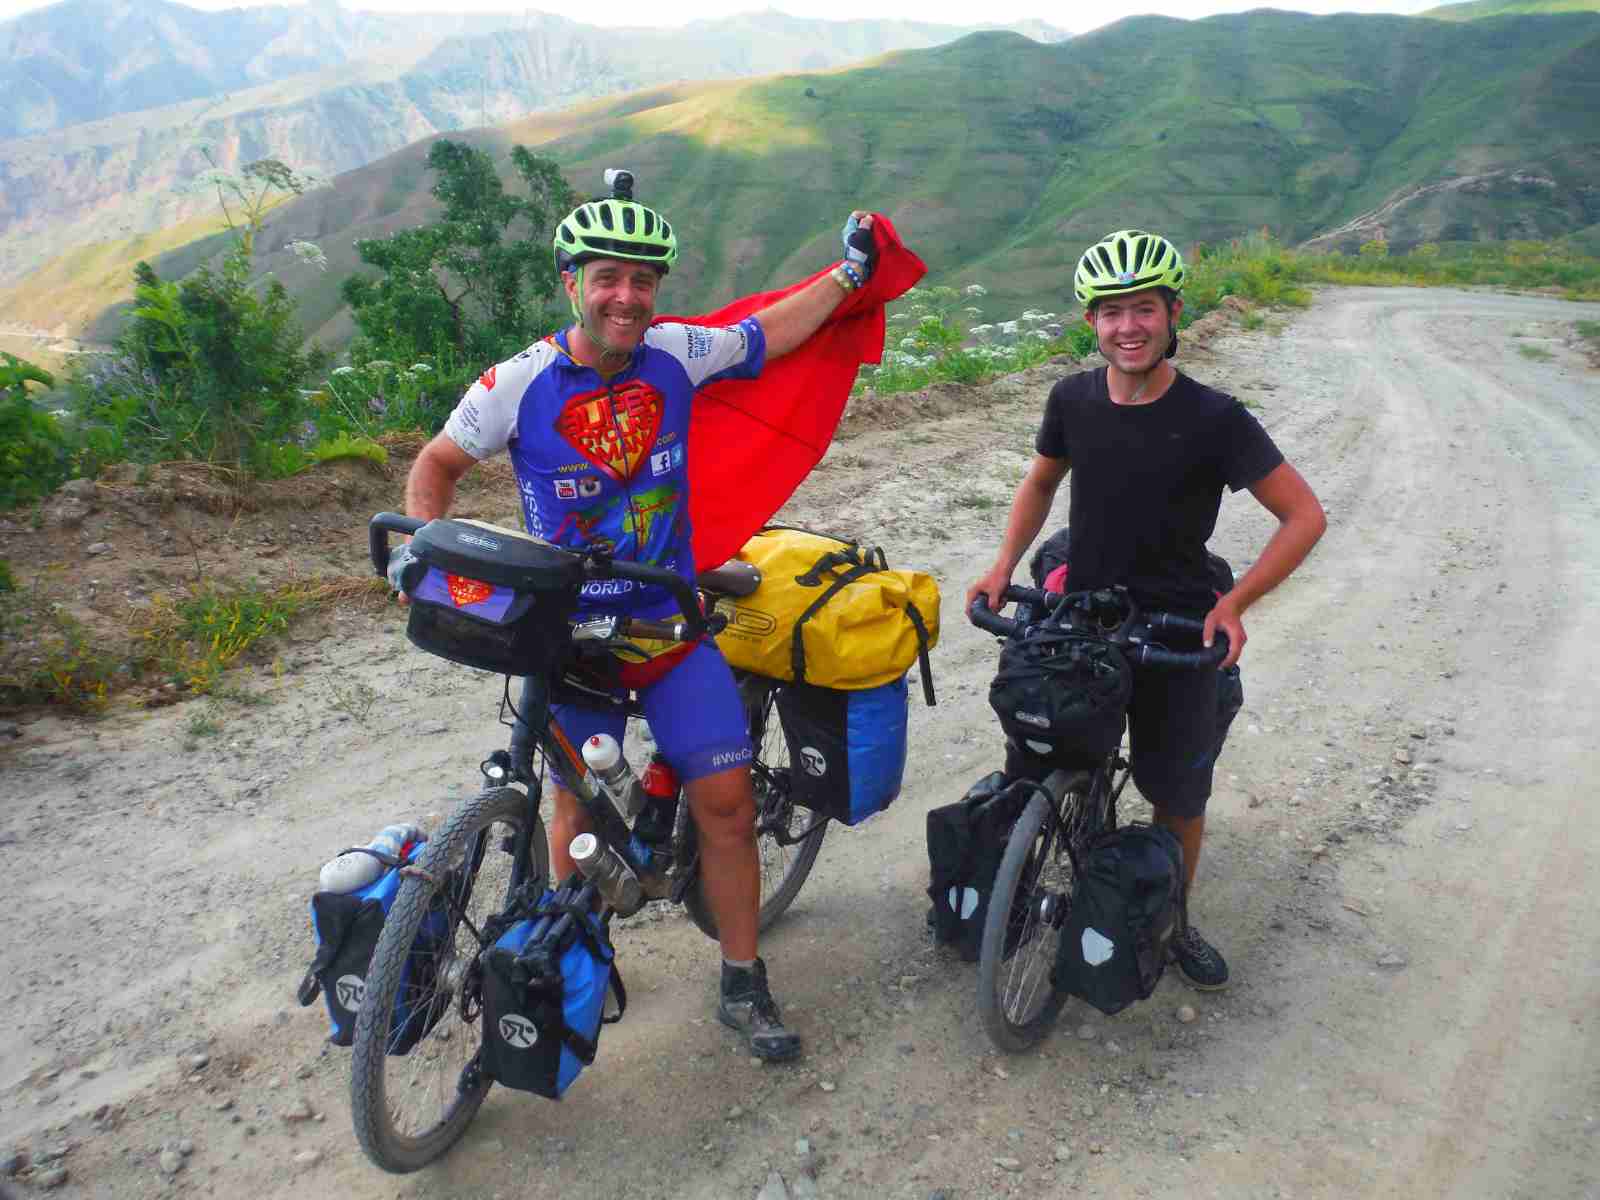 cycling superman and jo skeats at the Dushanbe end of the pamir highway